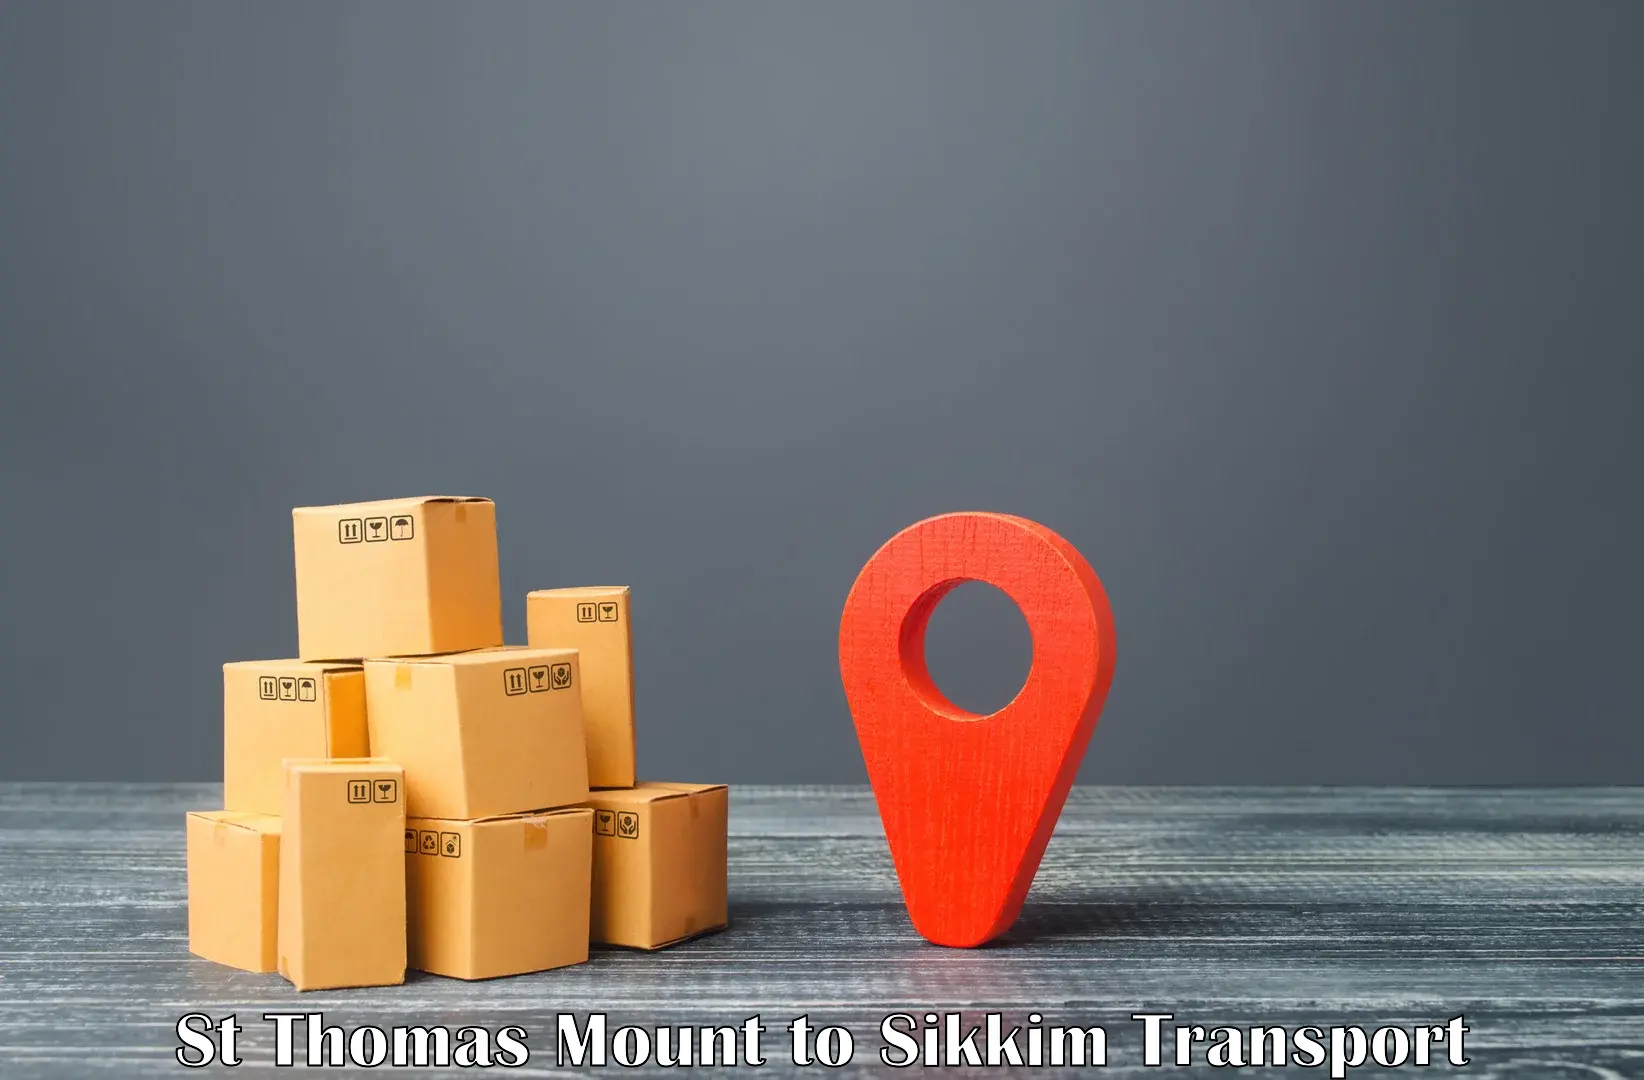 Shipping partner St Thomas Mount to North Sikkim